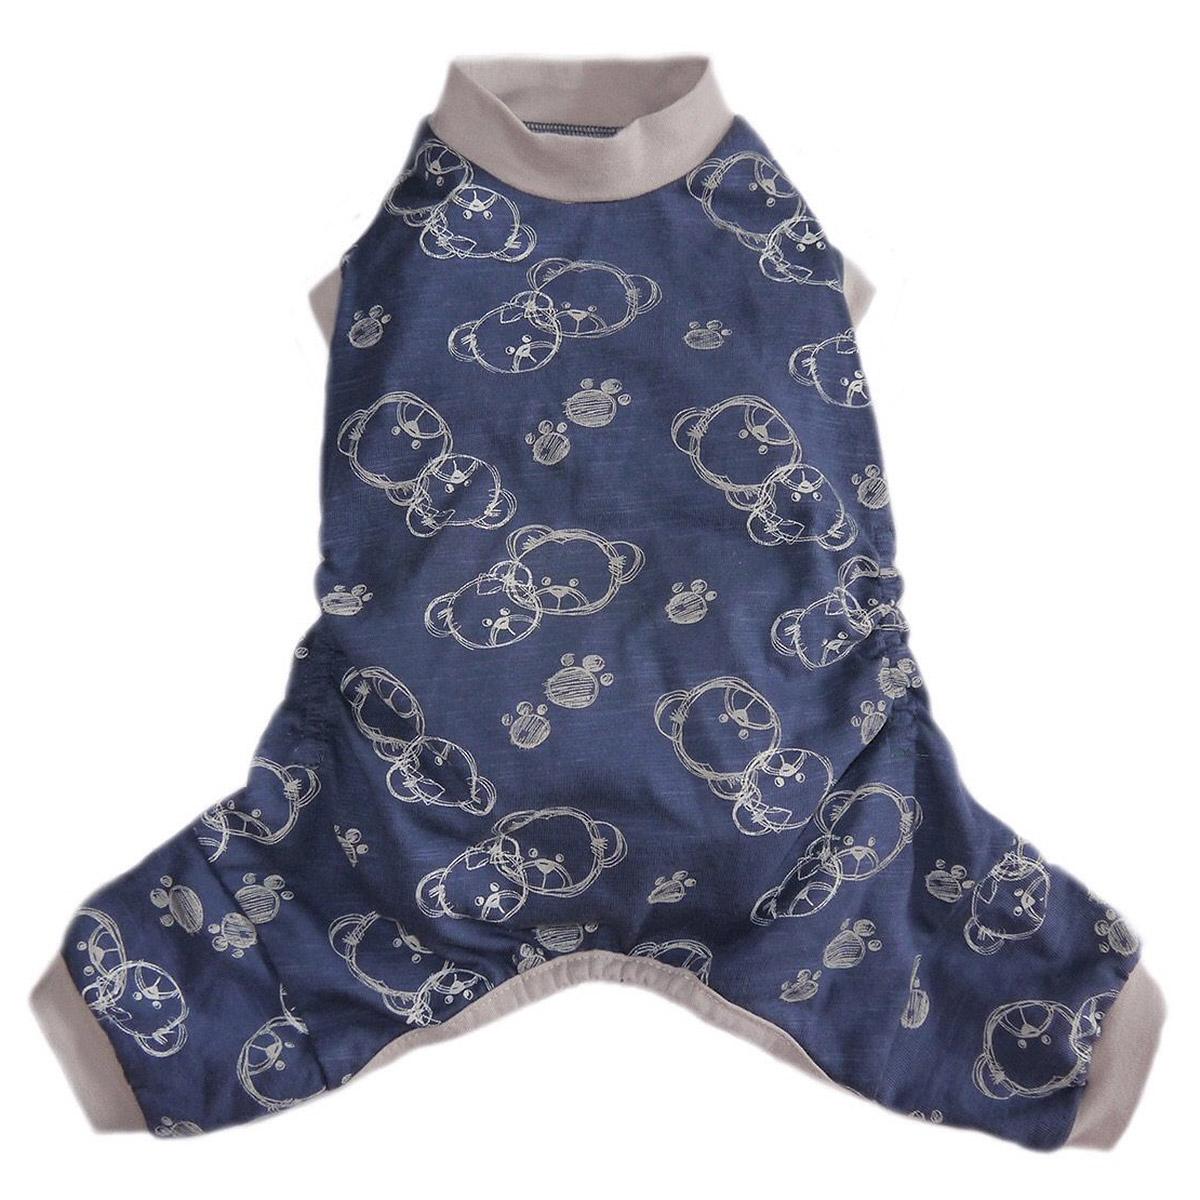 Pooch Outfitters Milo Dog Pajamas with Gray Trim